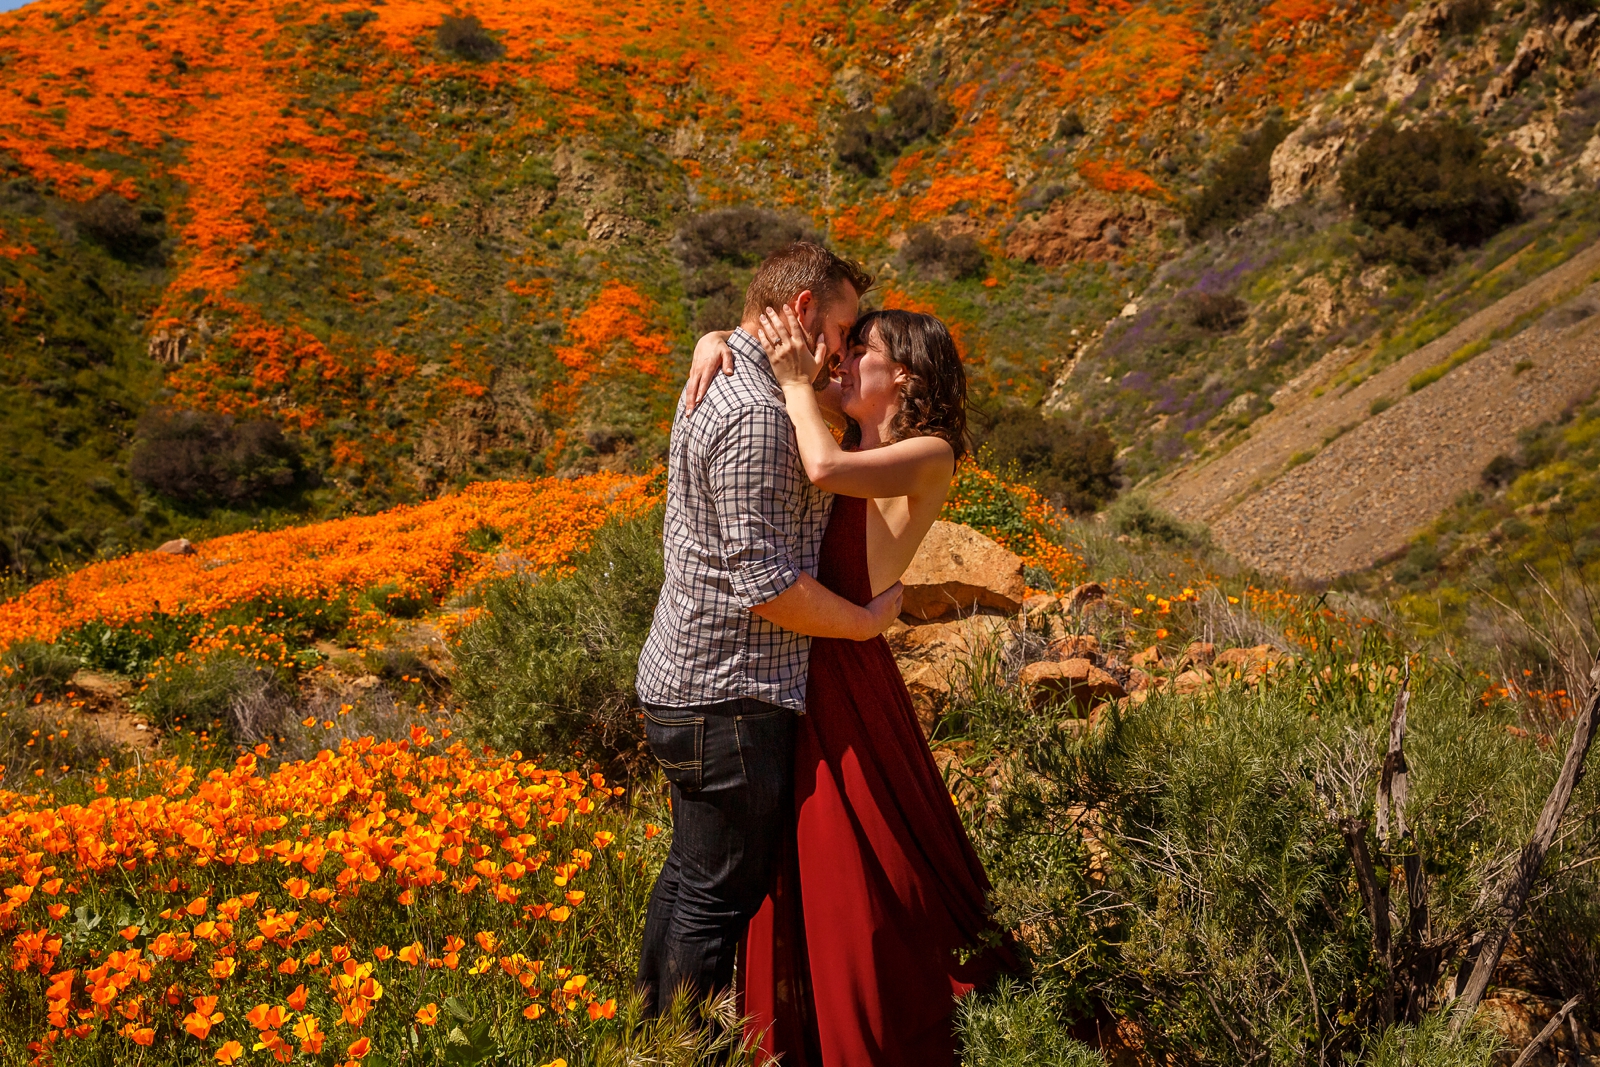 Kissing couple in spring SoCal wildflowers.